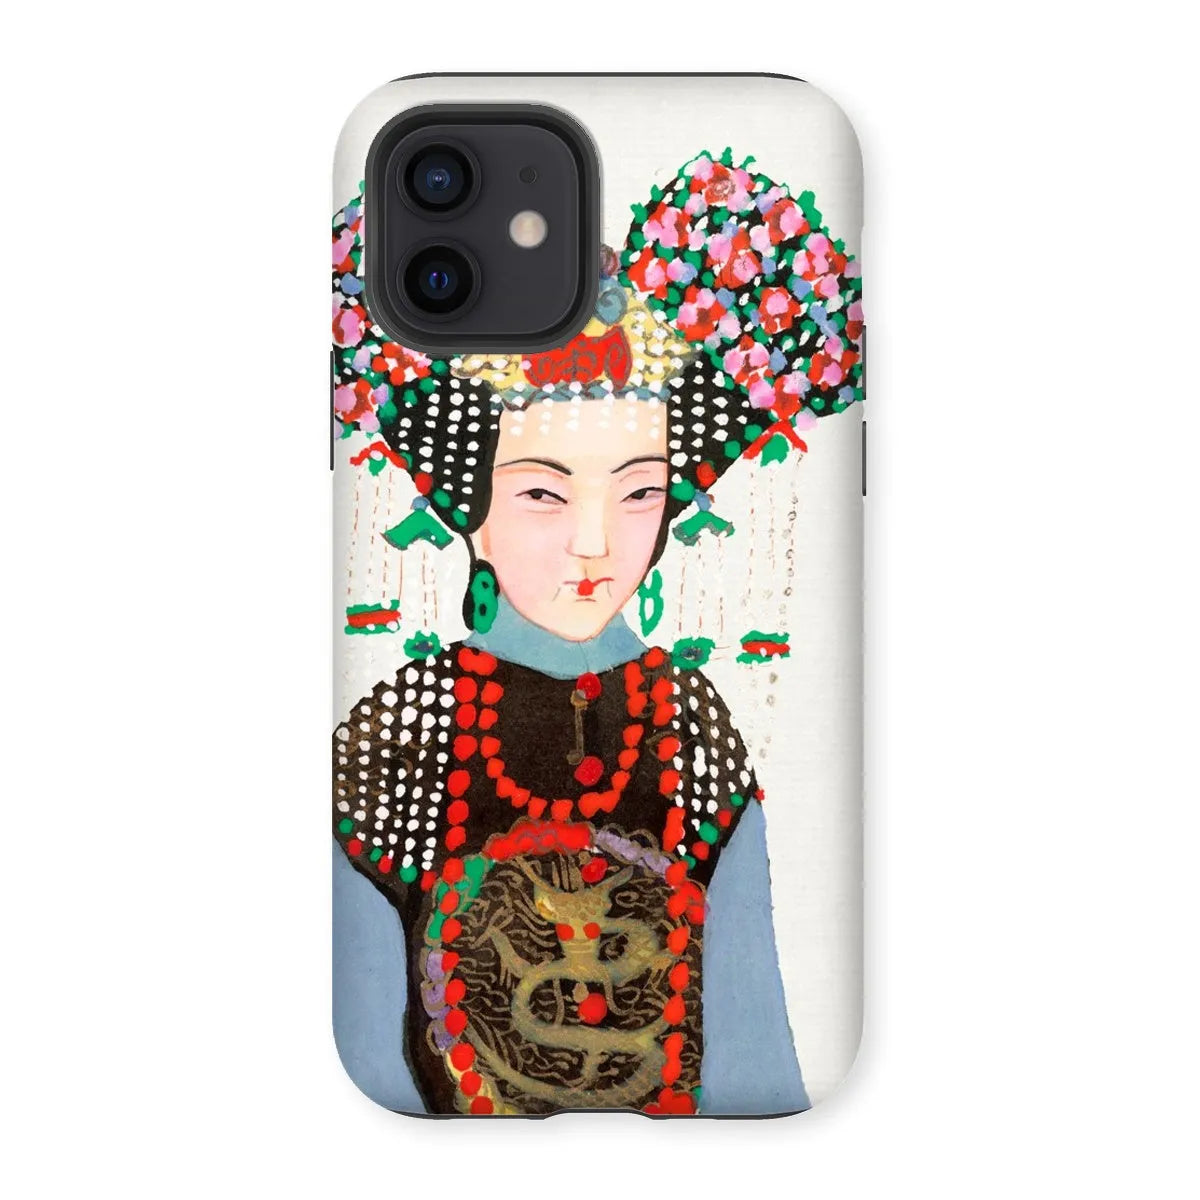 Chinese Empress - Manchu Art Phone Case - Iphone 12 / Matte - Mobile Phone Cases - Aesthetic Art